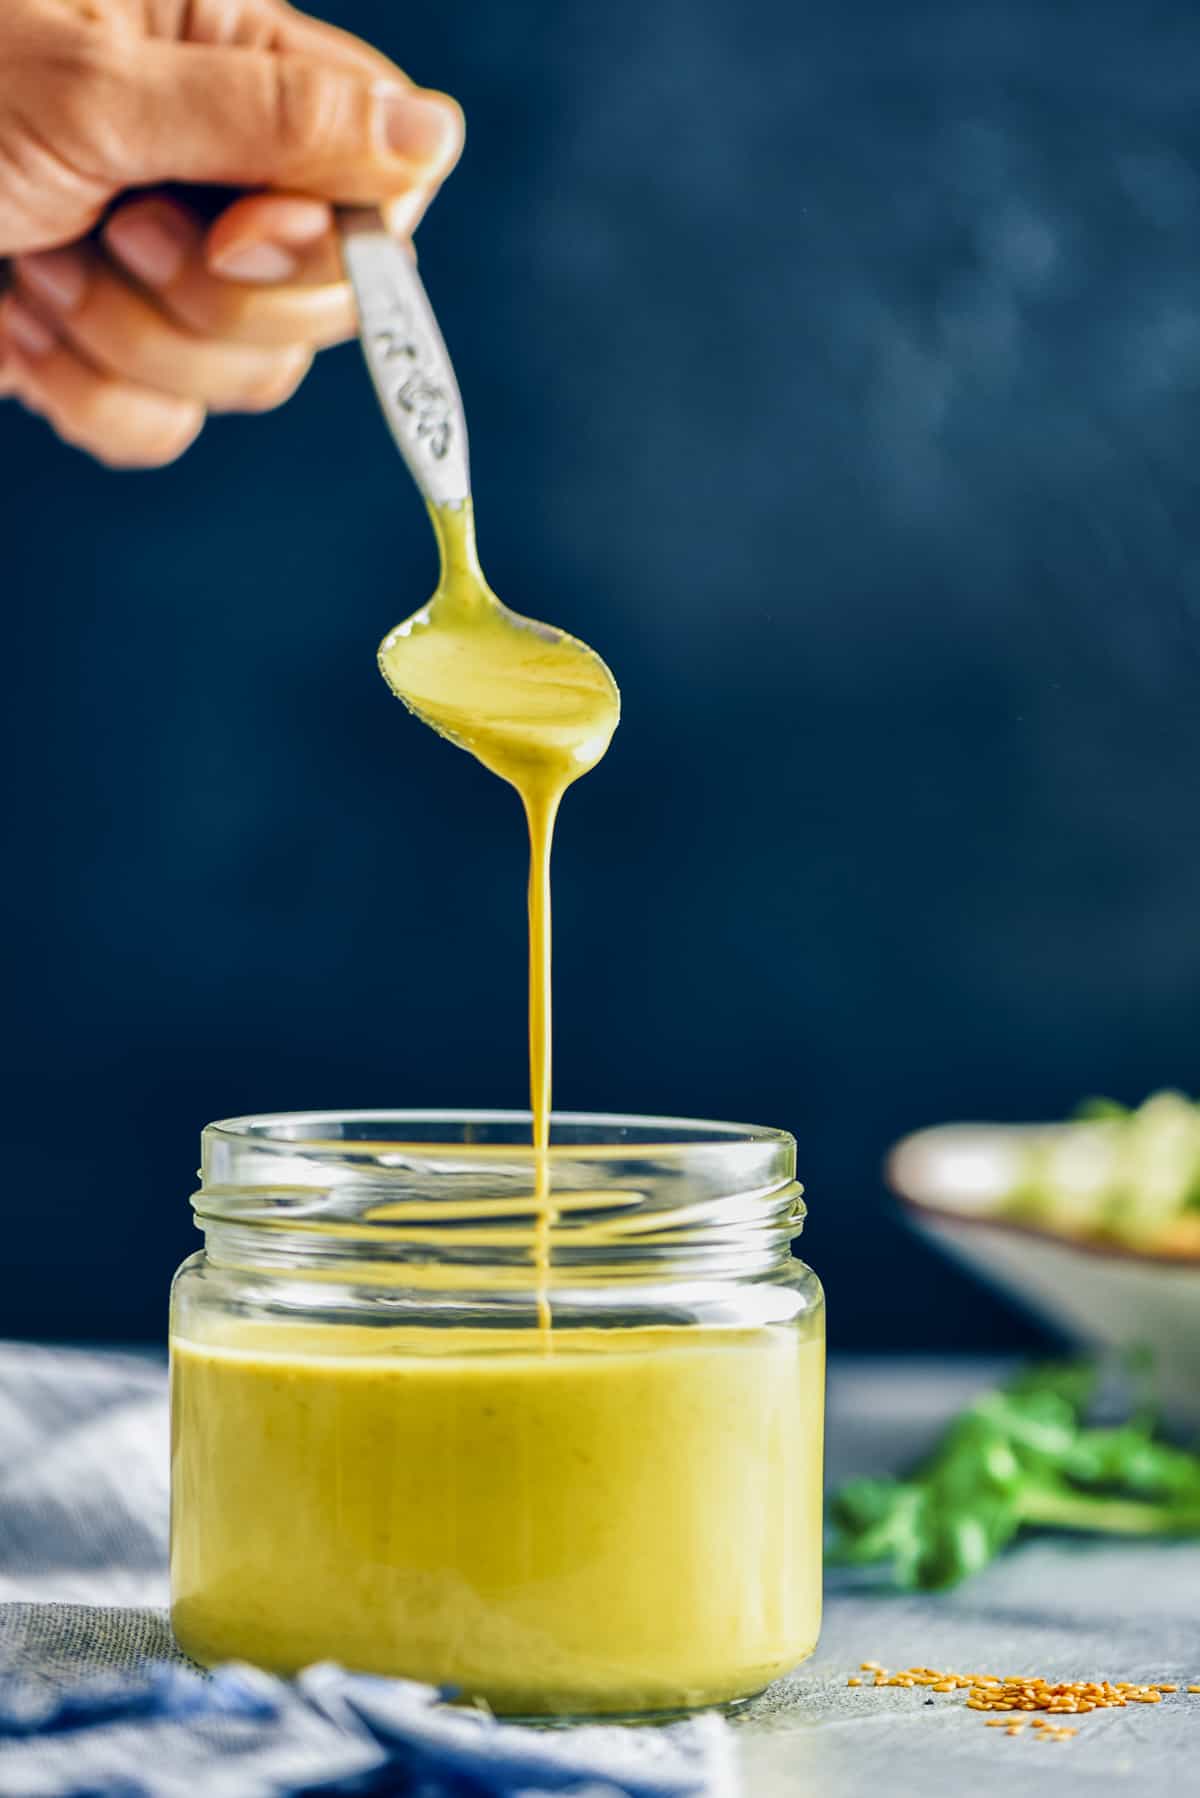 A hand holding a spoon dripping tahini dressing into a jar.